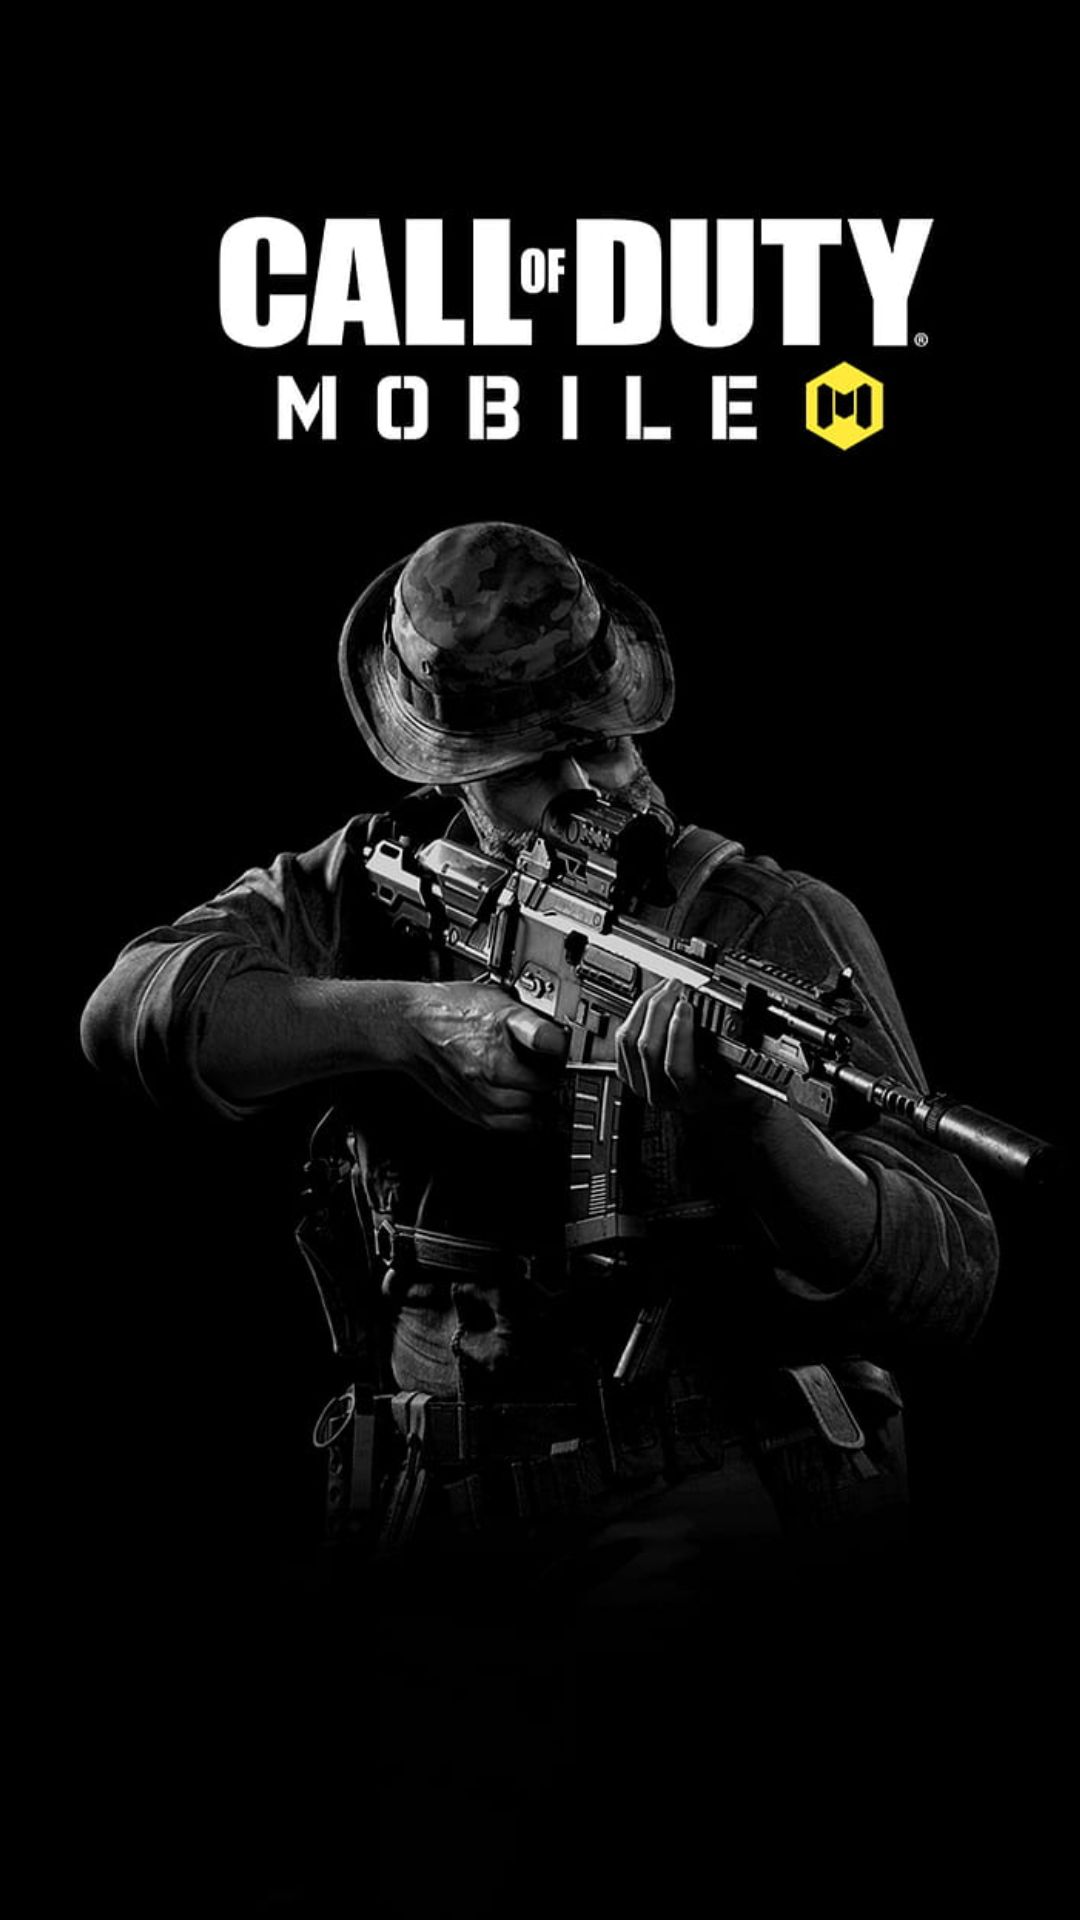 Call of Duty Mobile Wallpapers - Top 30